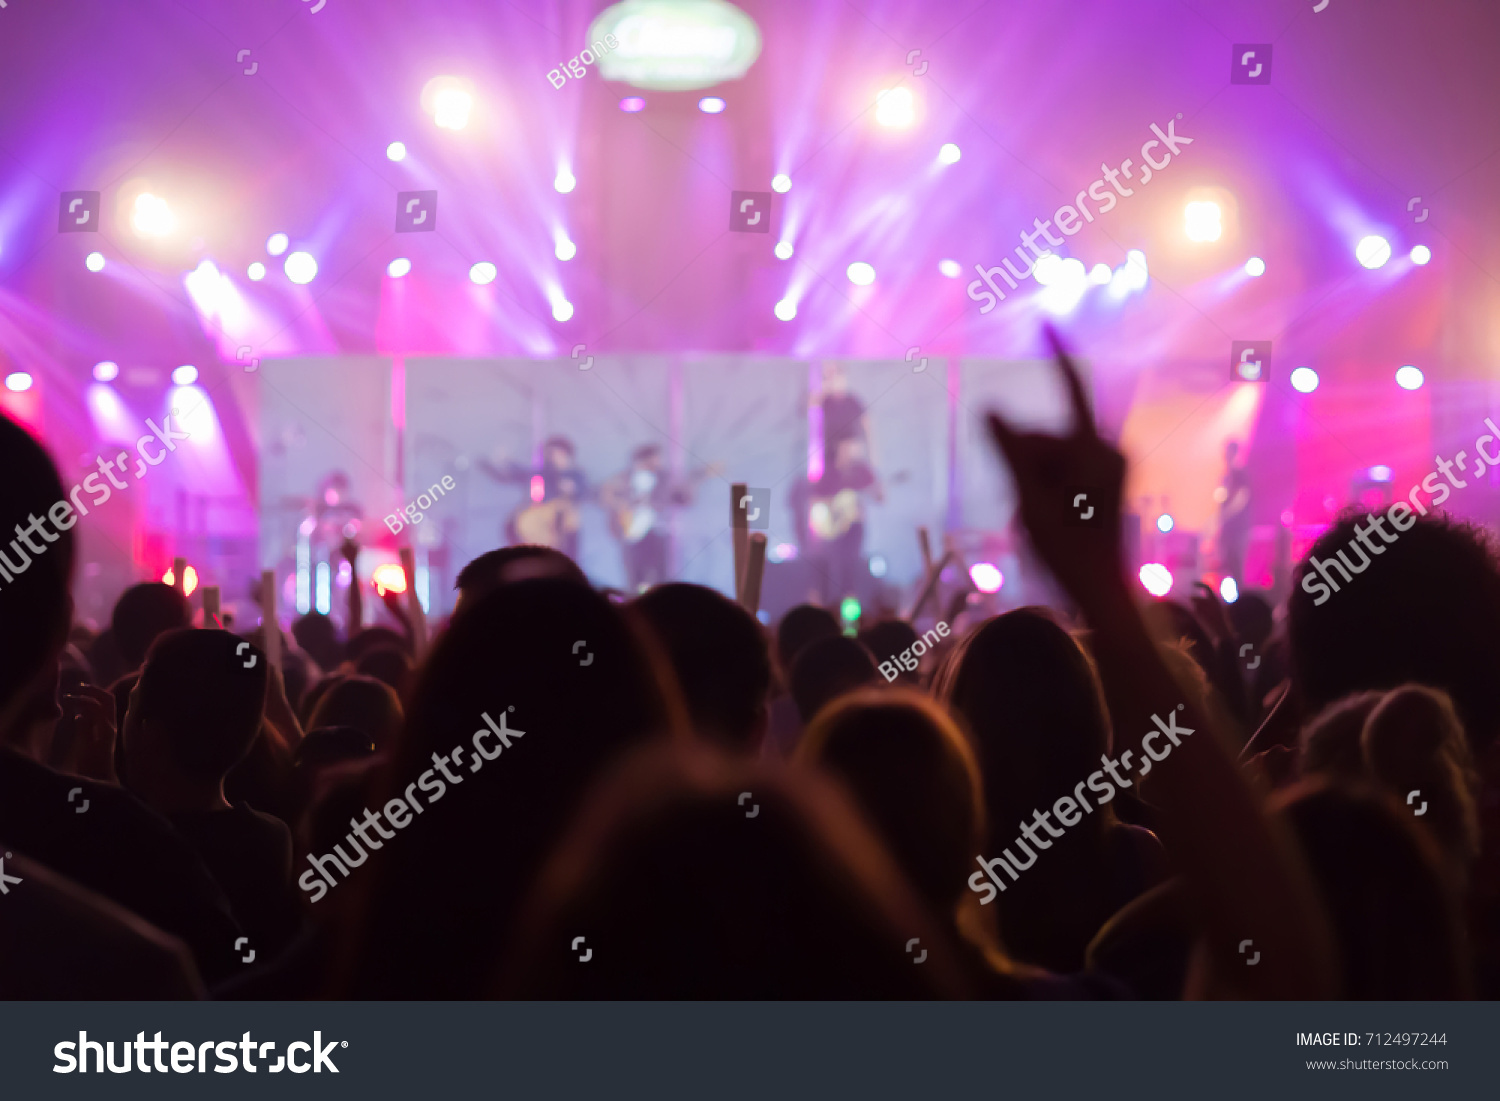 Silhouette hands of audience crowd people  enjoying the club party concert ,Celebrate new year party , Blurry night club party music dancing sound , Party People Blurred Background #712497244